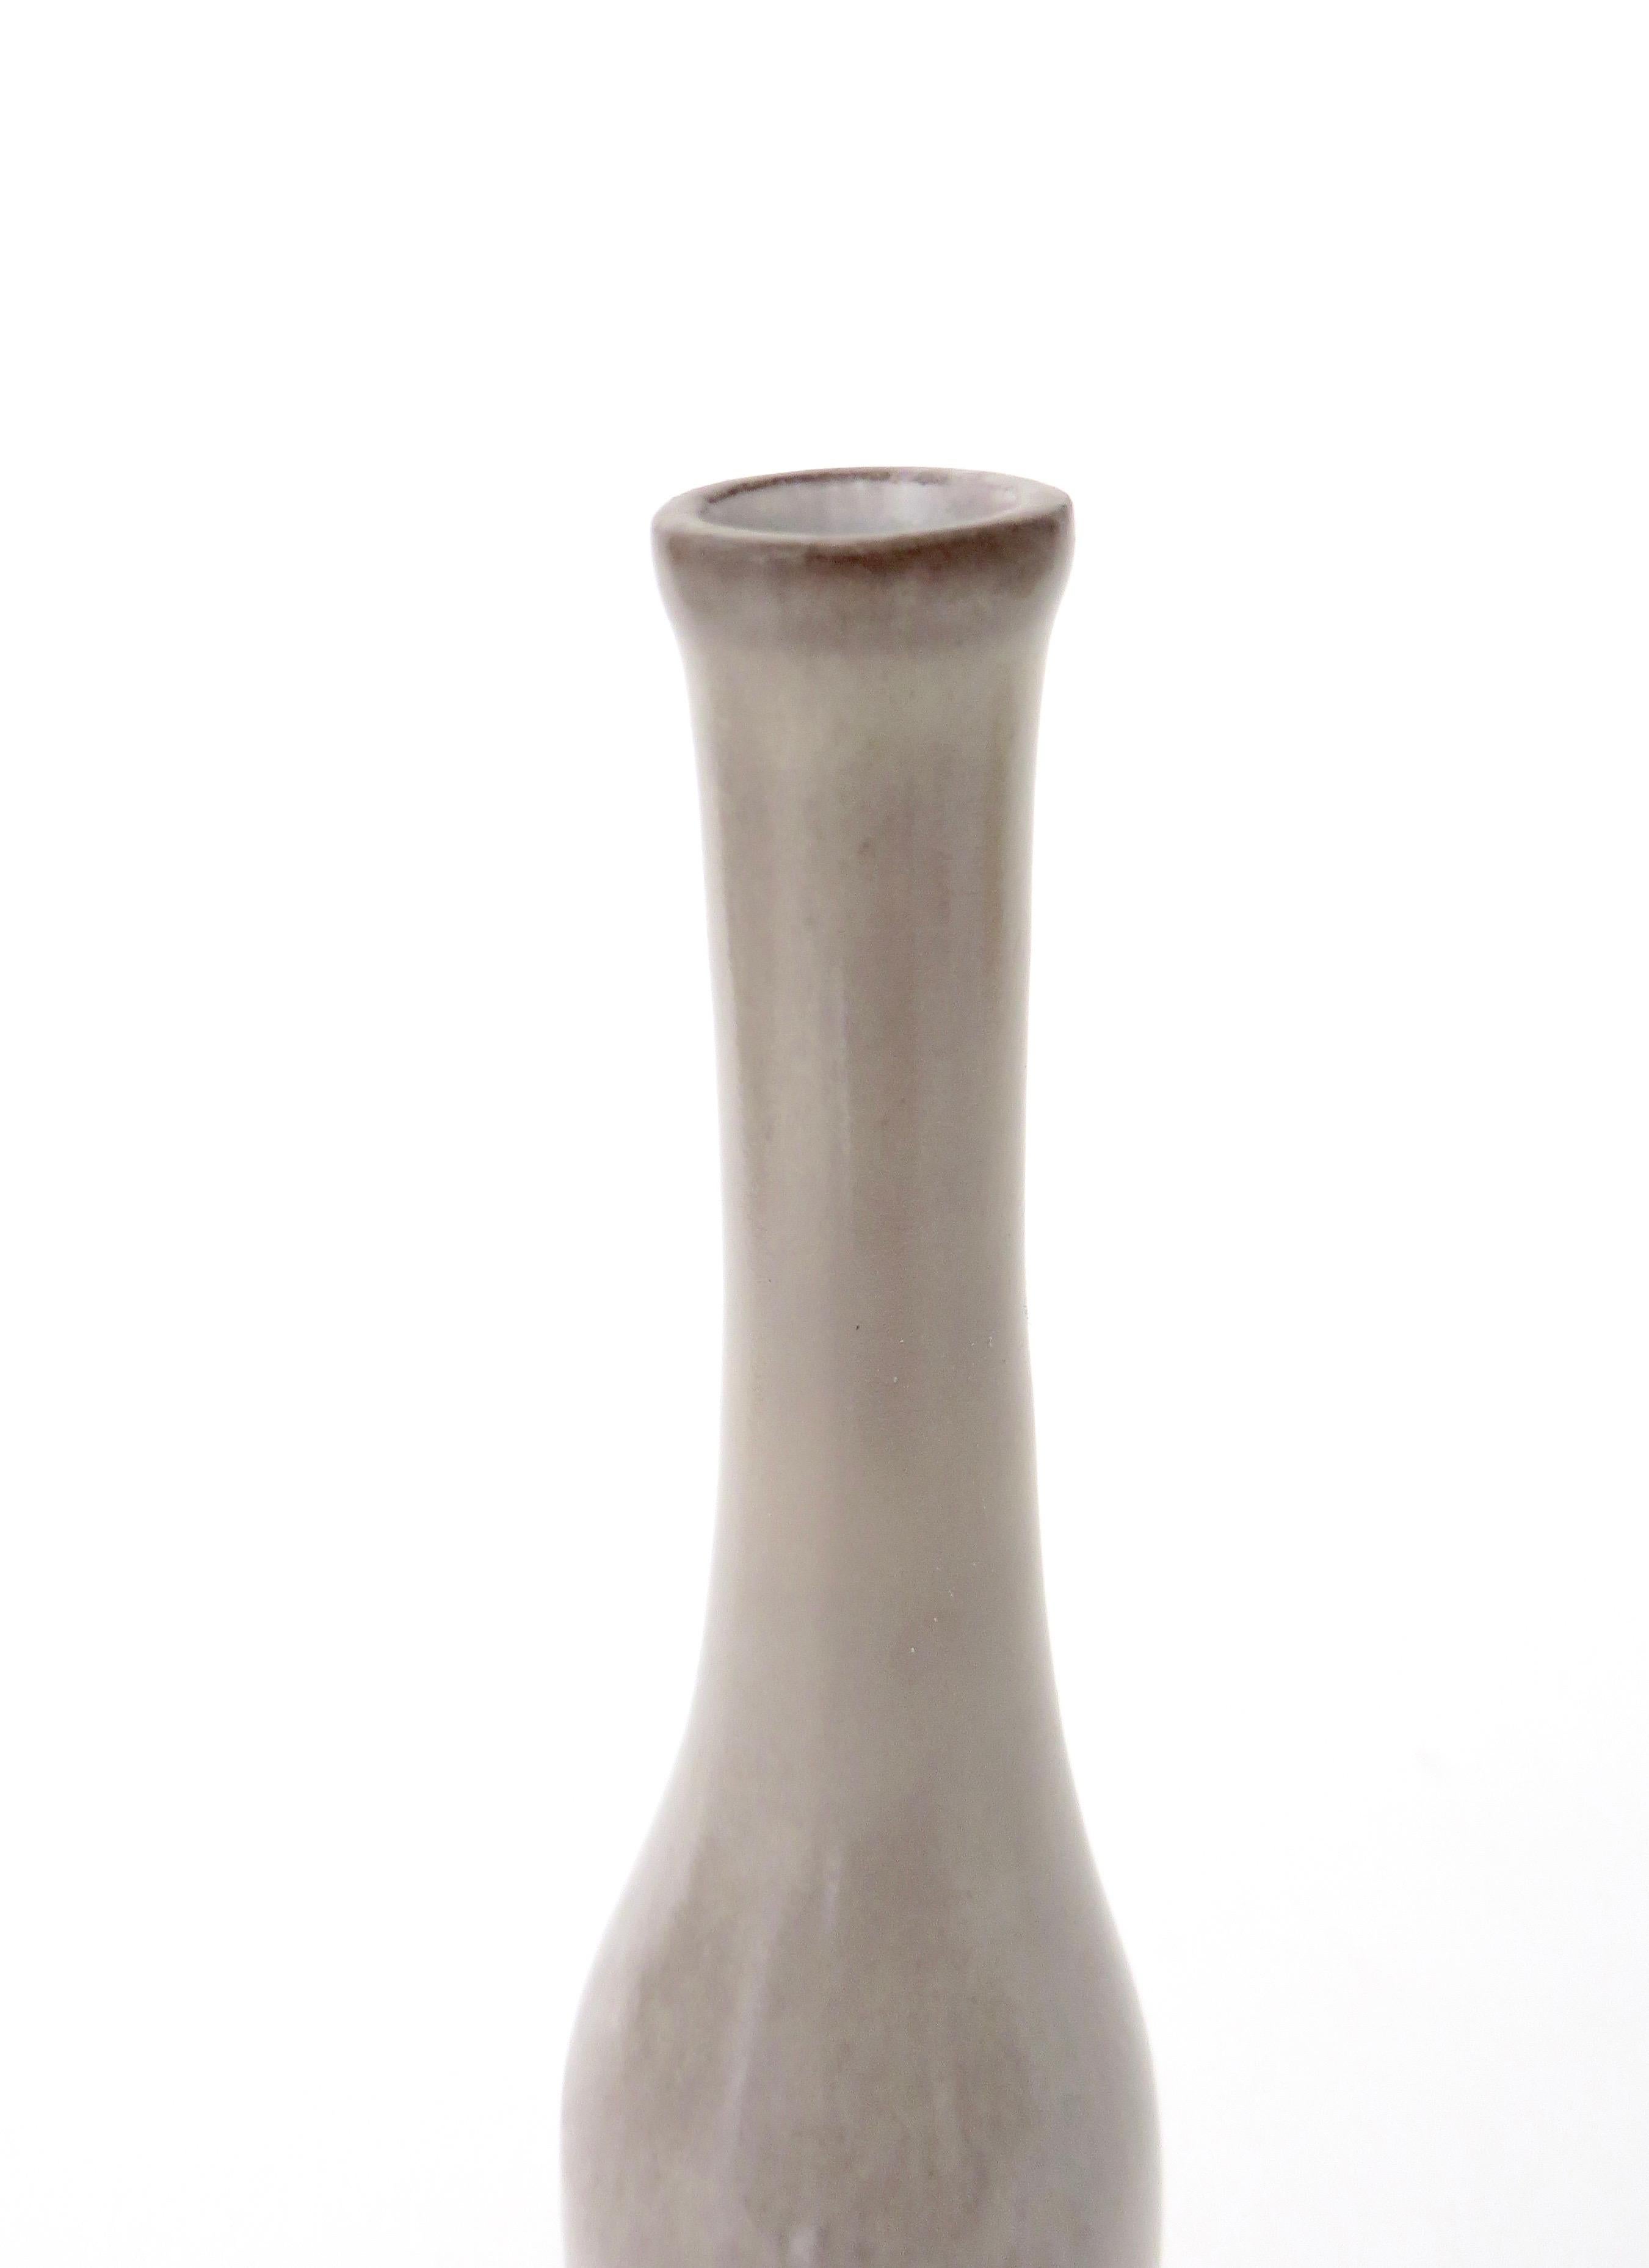 Jacques and Dani Ruelland French Ceramic Bottle In Pale Gray to Lavender Glaze 1